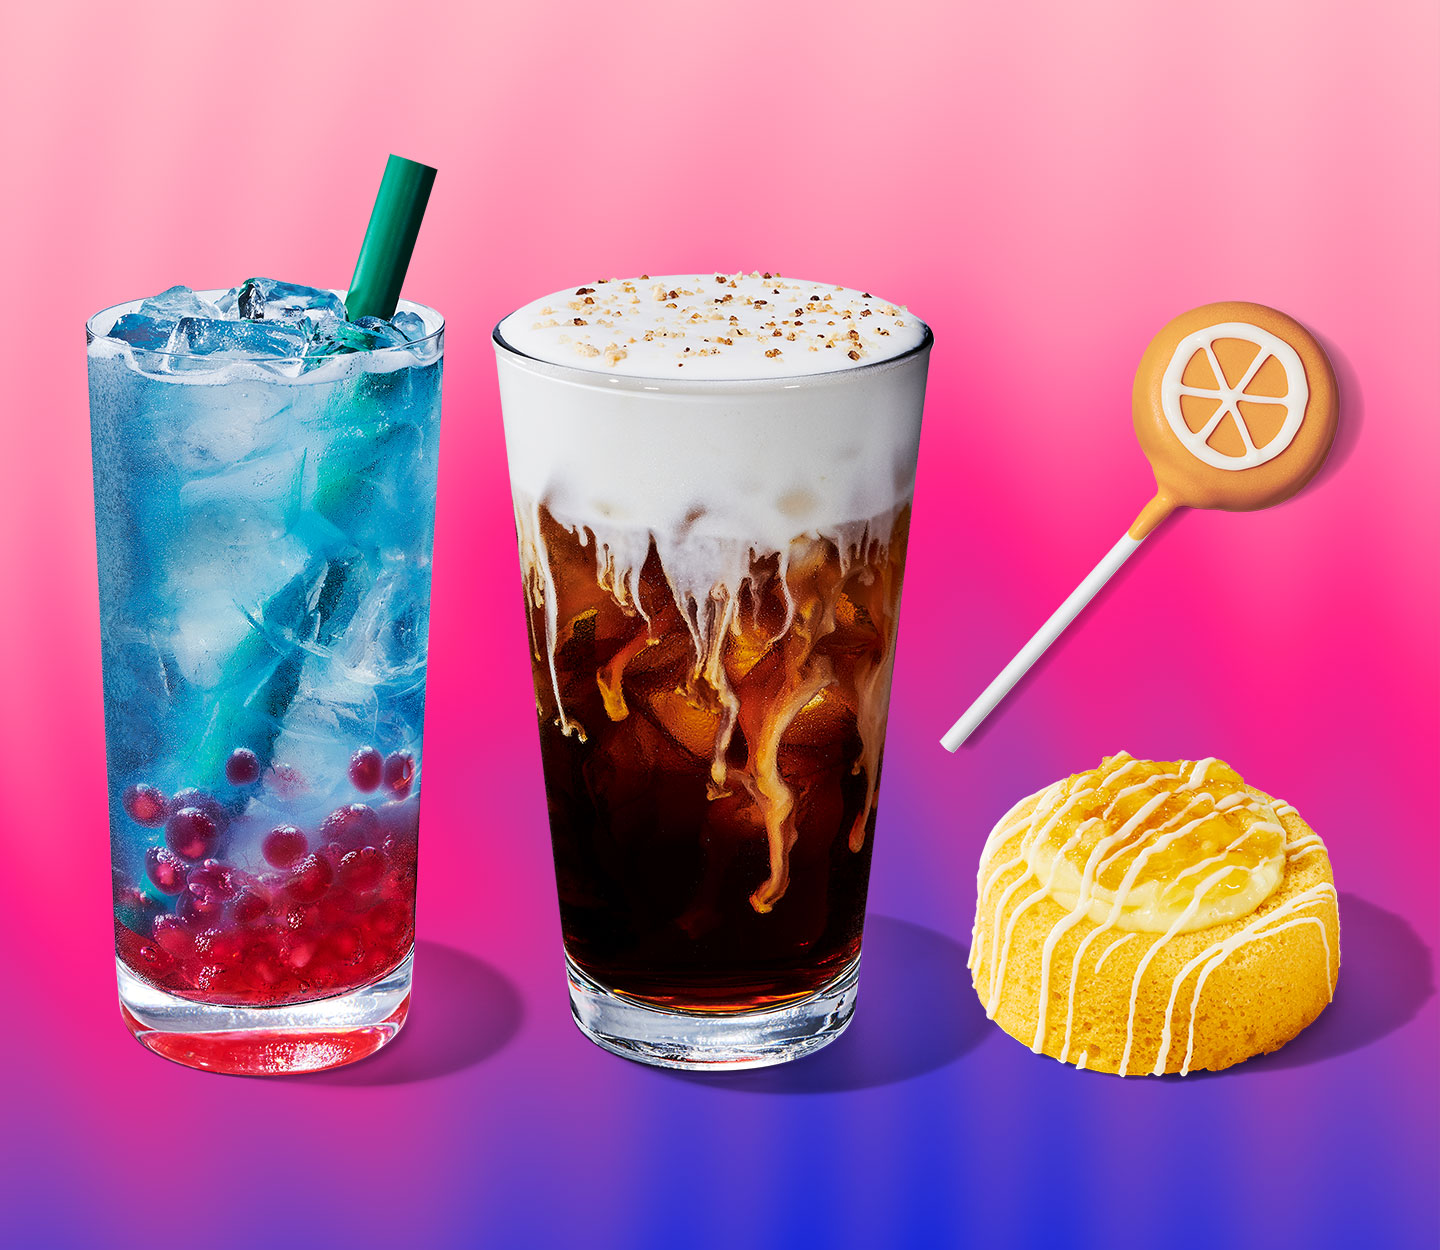 A blue drink with red pearls in a tall glass, a creamy cold coffee with creamy topping, a round, pineapple pastry and a cake pop.